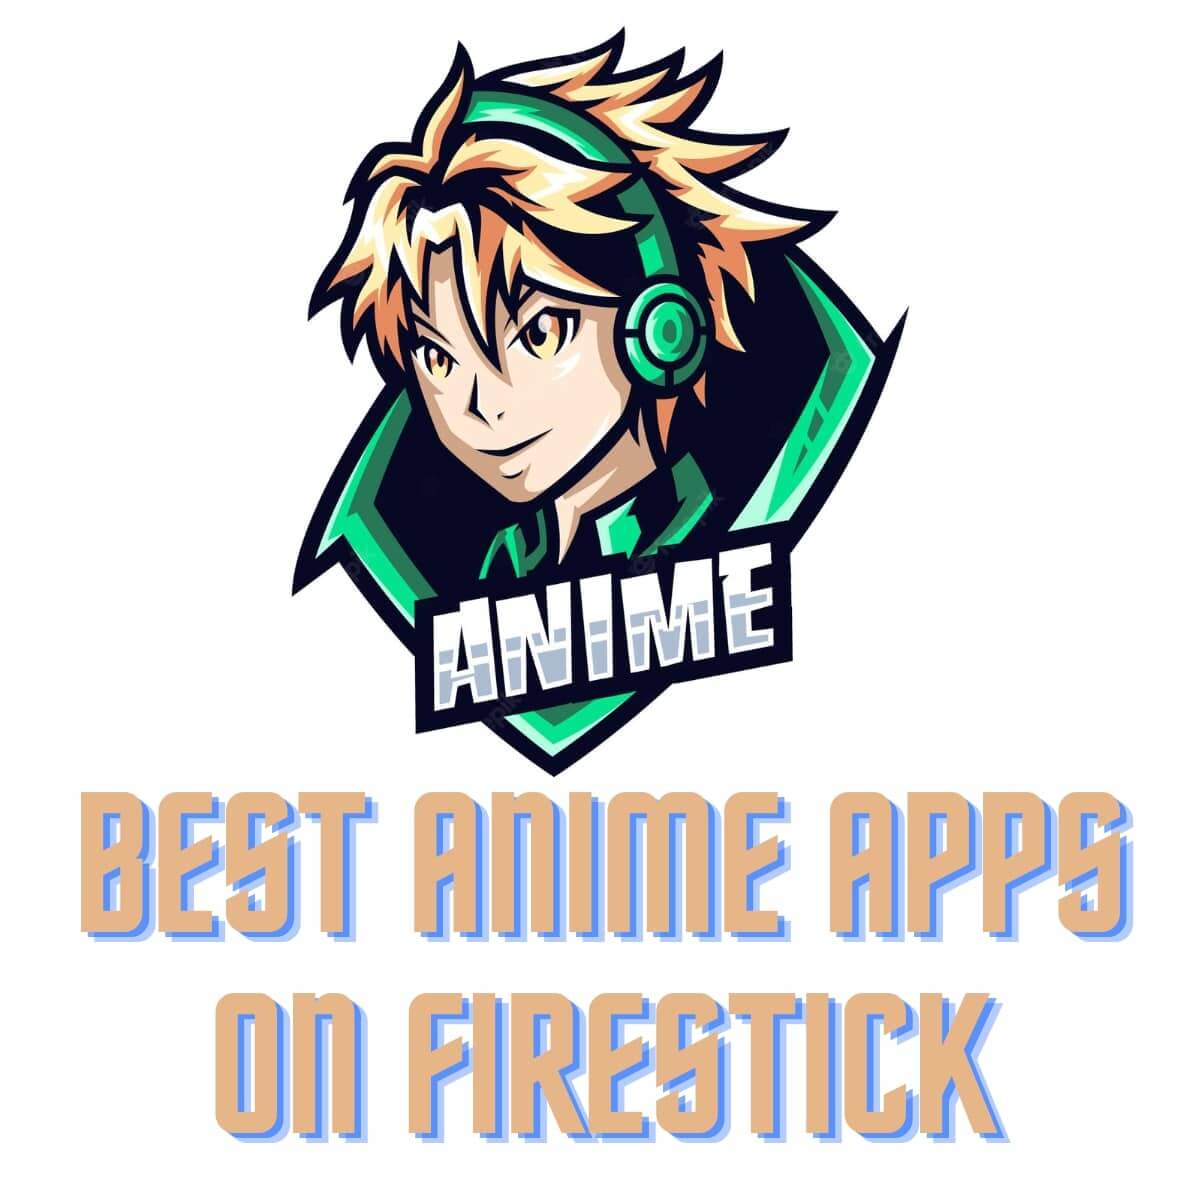 Animeland: English Dubbed Anime for Free - Firestick and Other